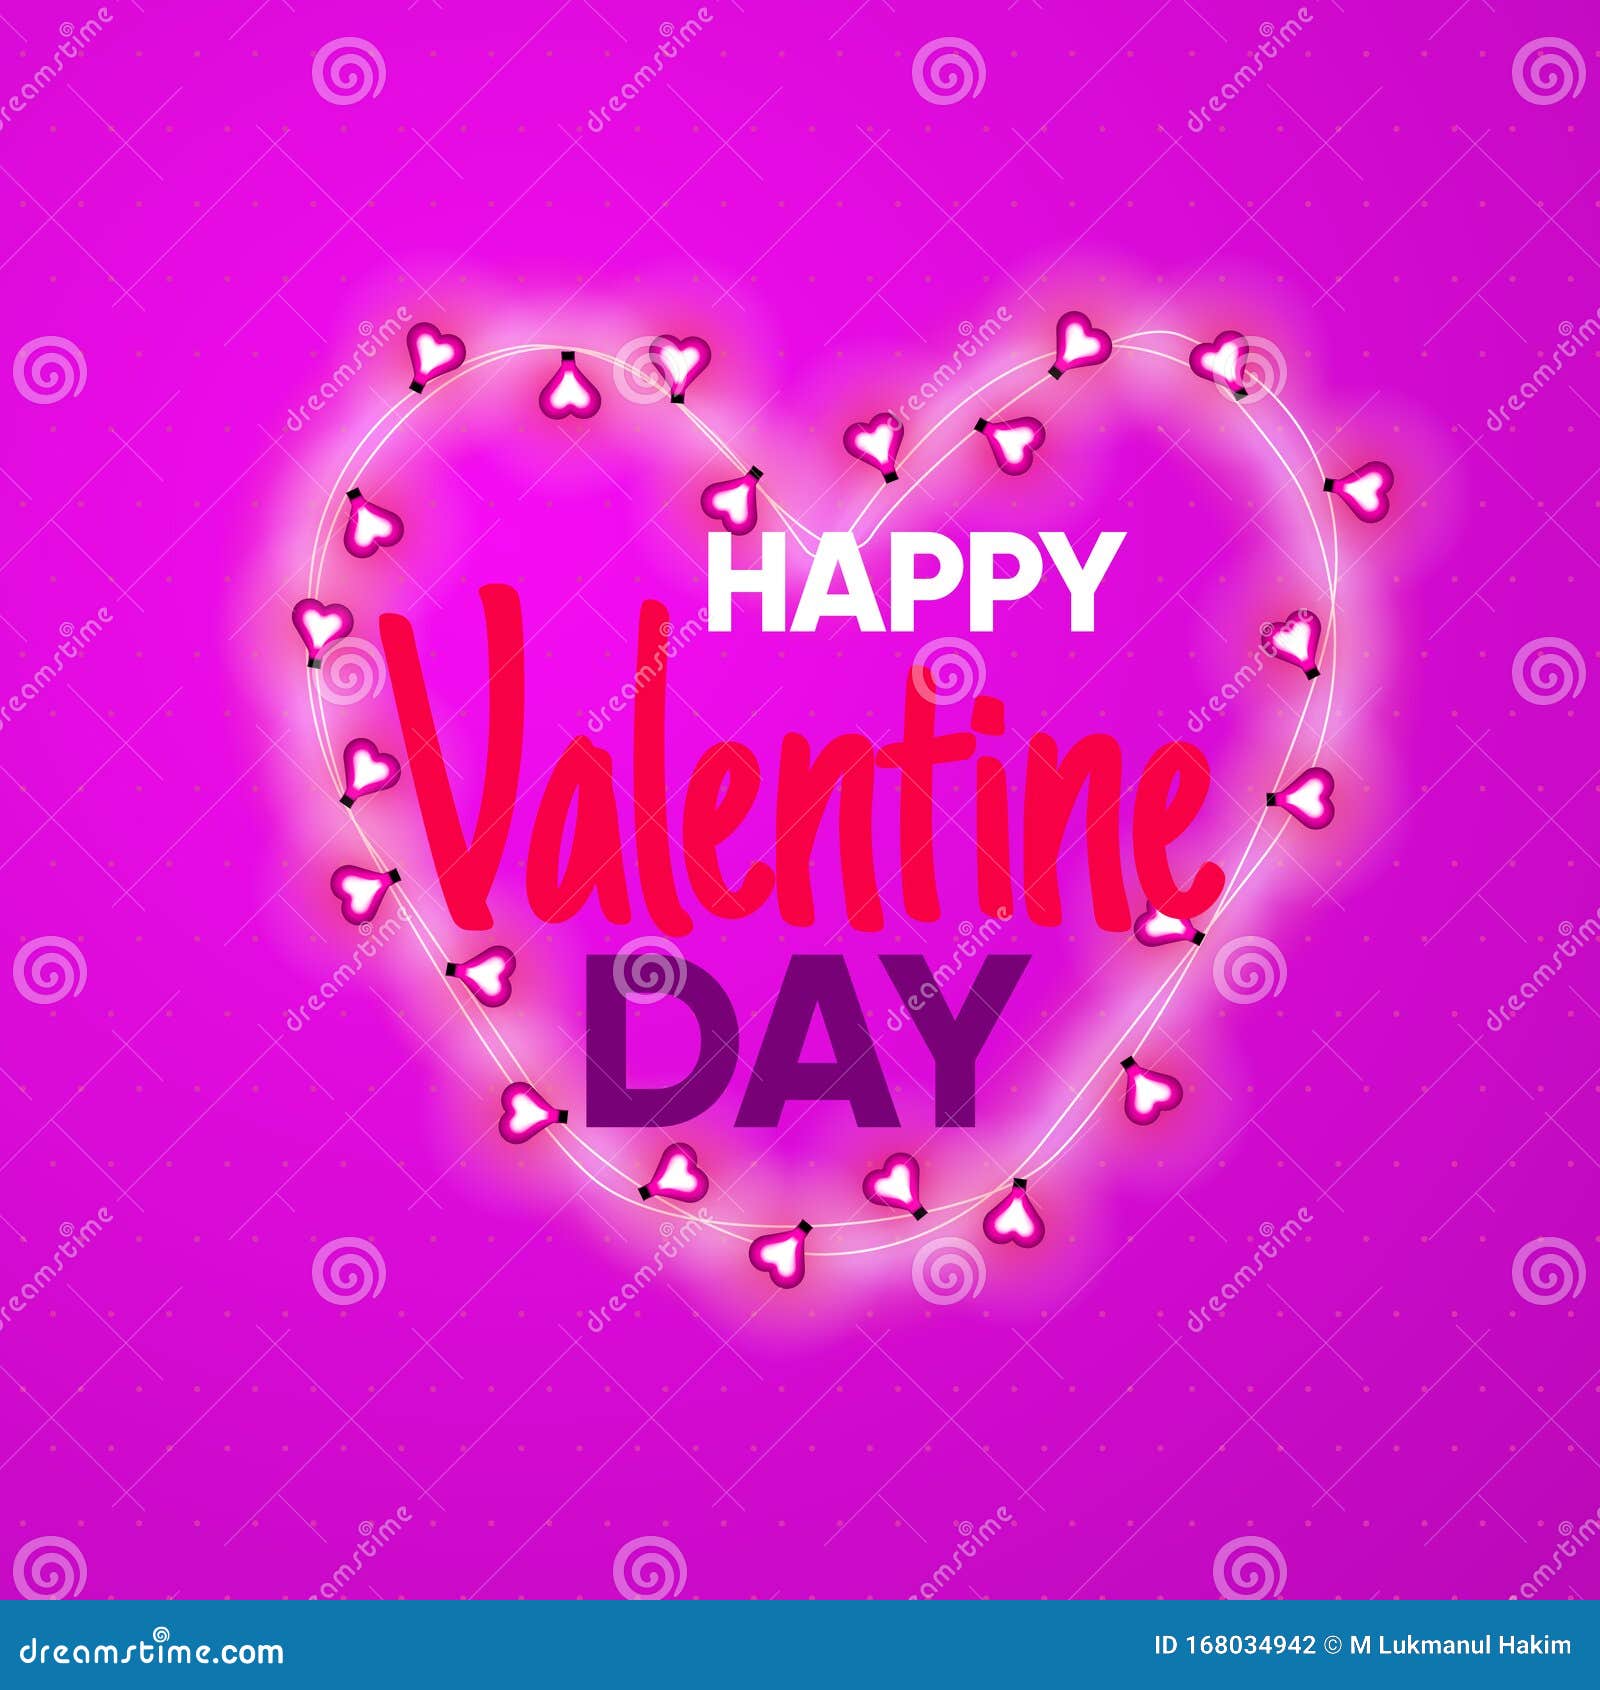 Aesthetic Square Background Happy Valentine Day with Lamp Love in Purple  Modern Stock Vector - Illustration of cutout, mode: 168034942